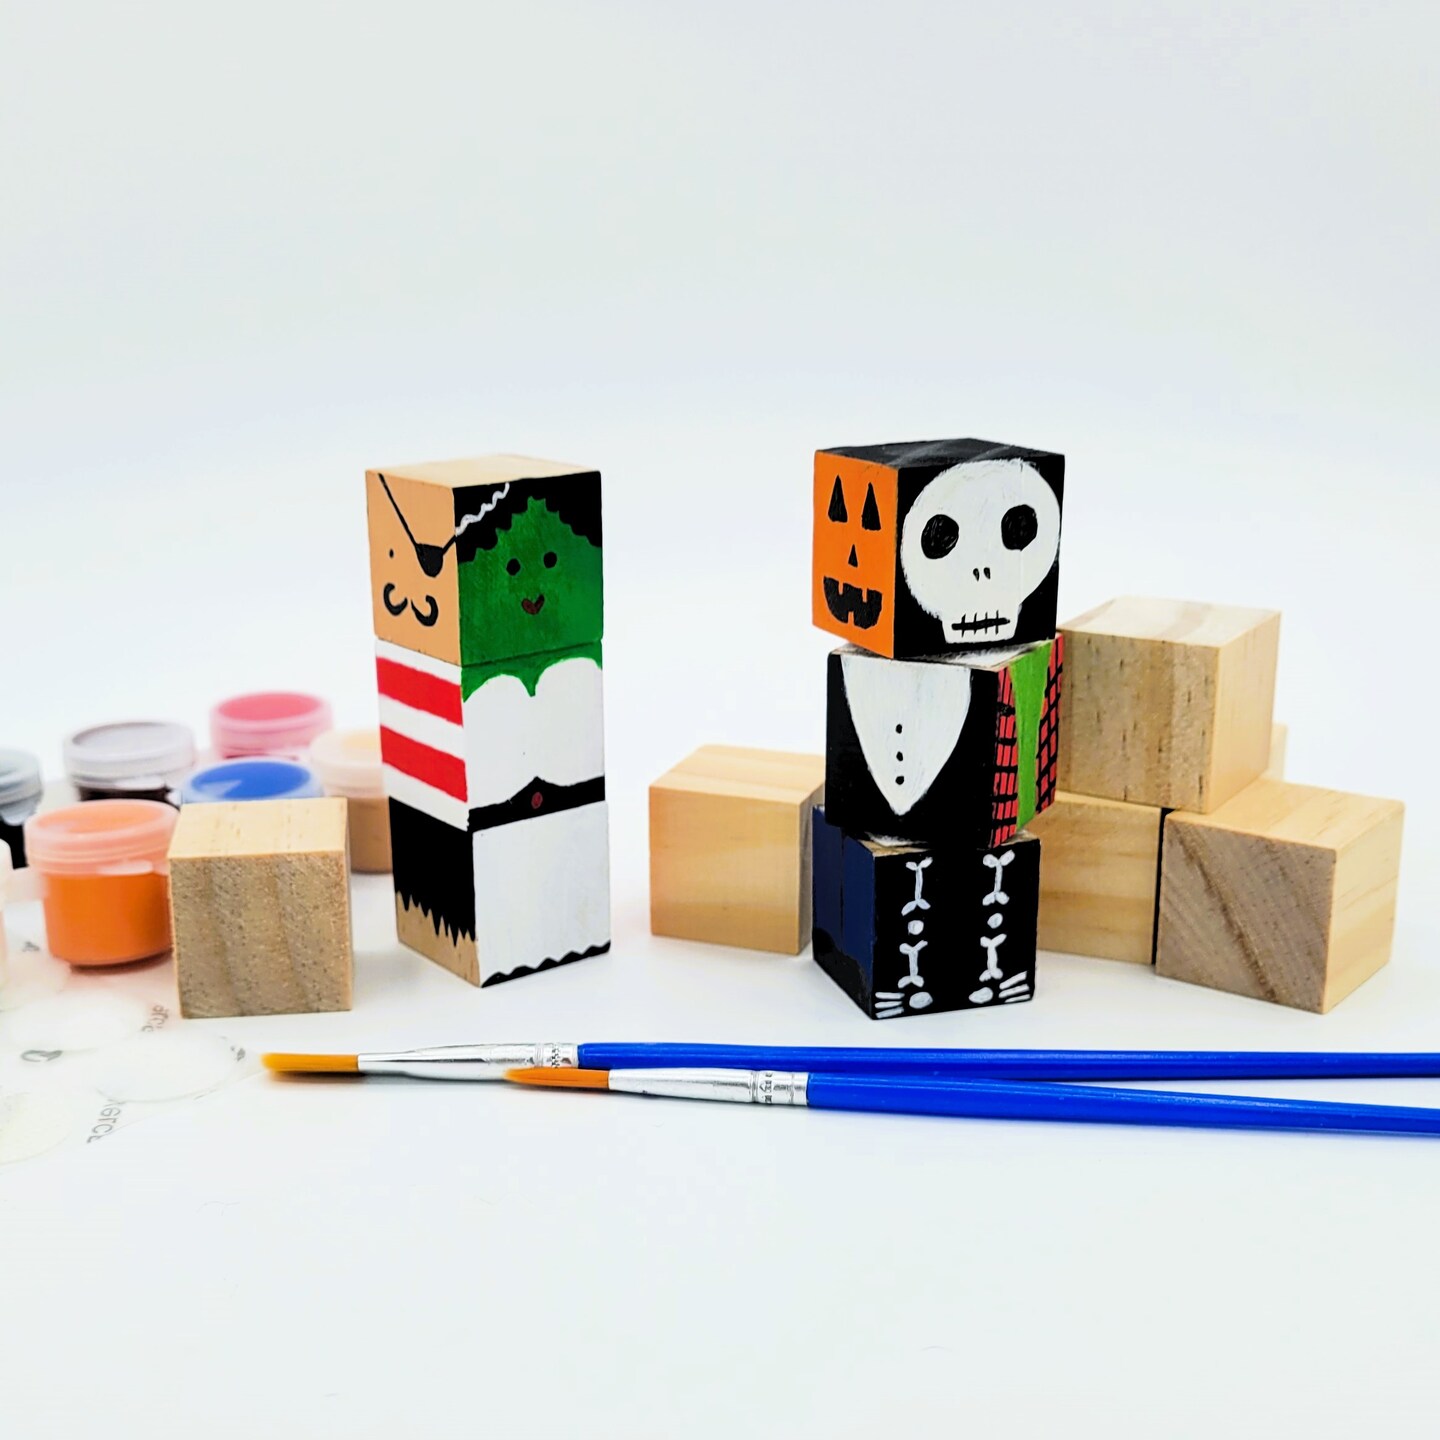 DIY Halloween Mix and Match Block Painting Craft Kit by Ink and Trinket Kids